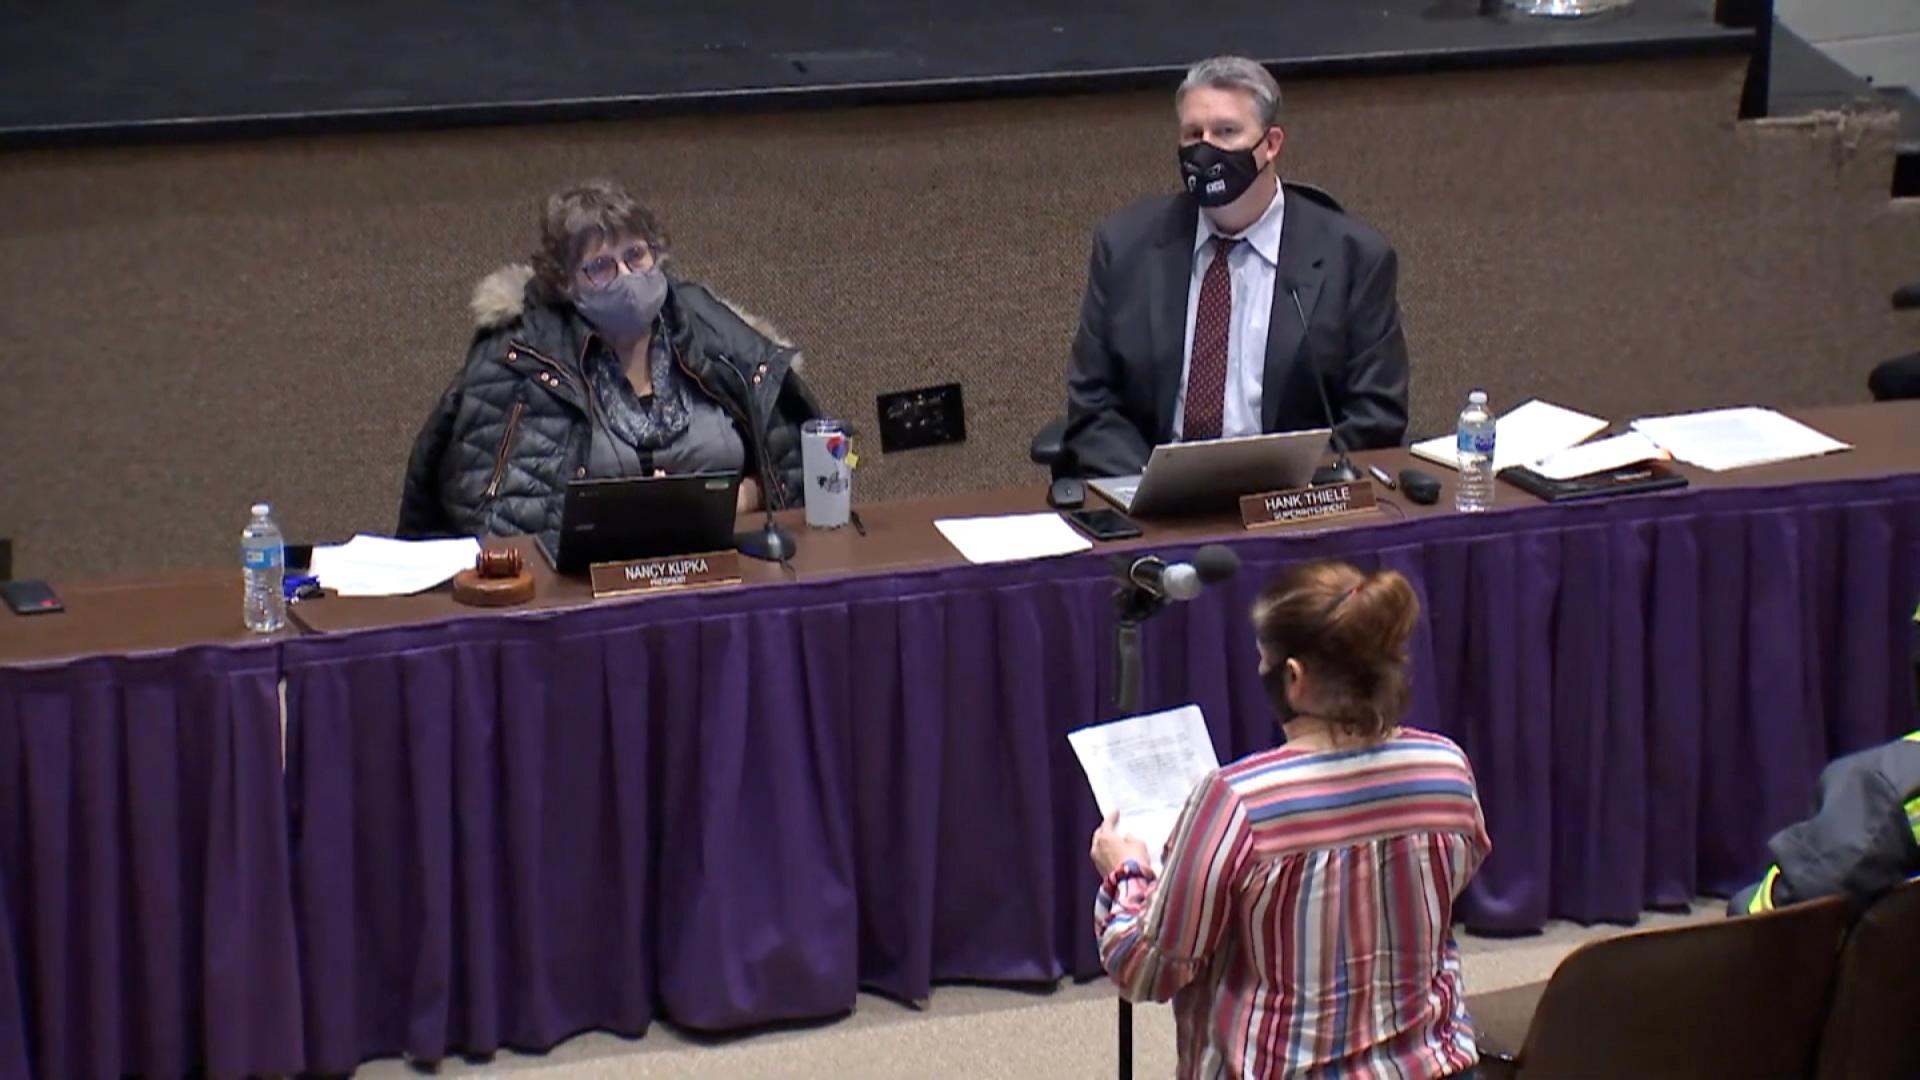 One of the speakers at the Downers Grove school board meeting that discussed the book "Gender Queer" by Maia Kobabe. (Credit: Community High School District 99)